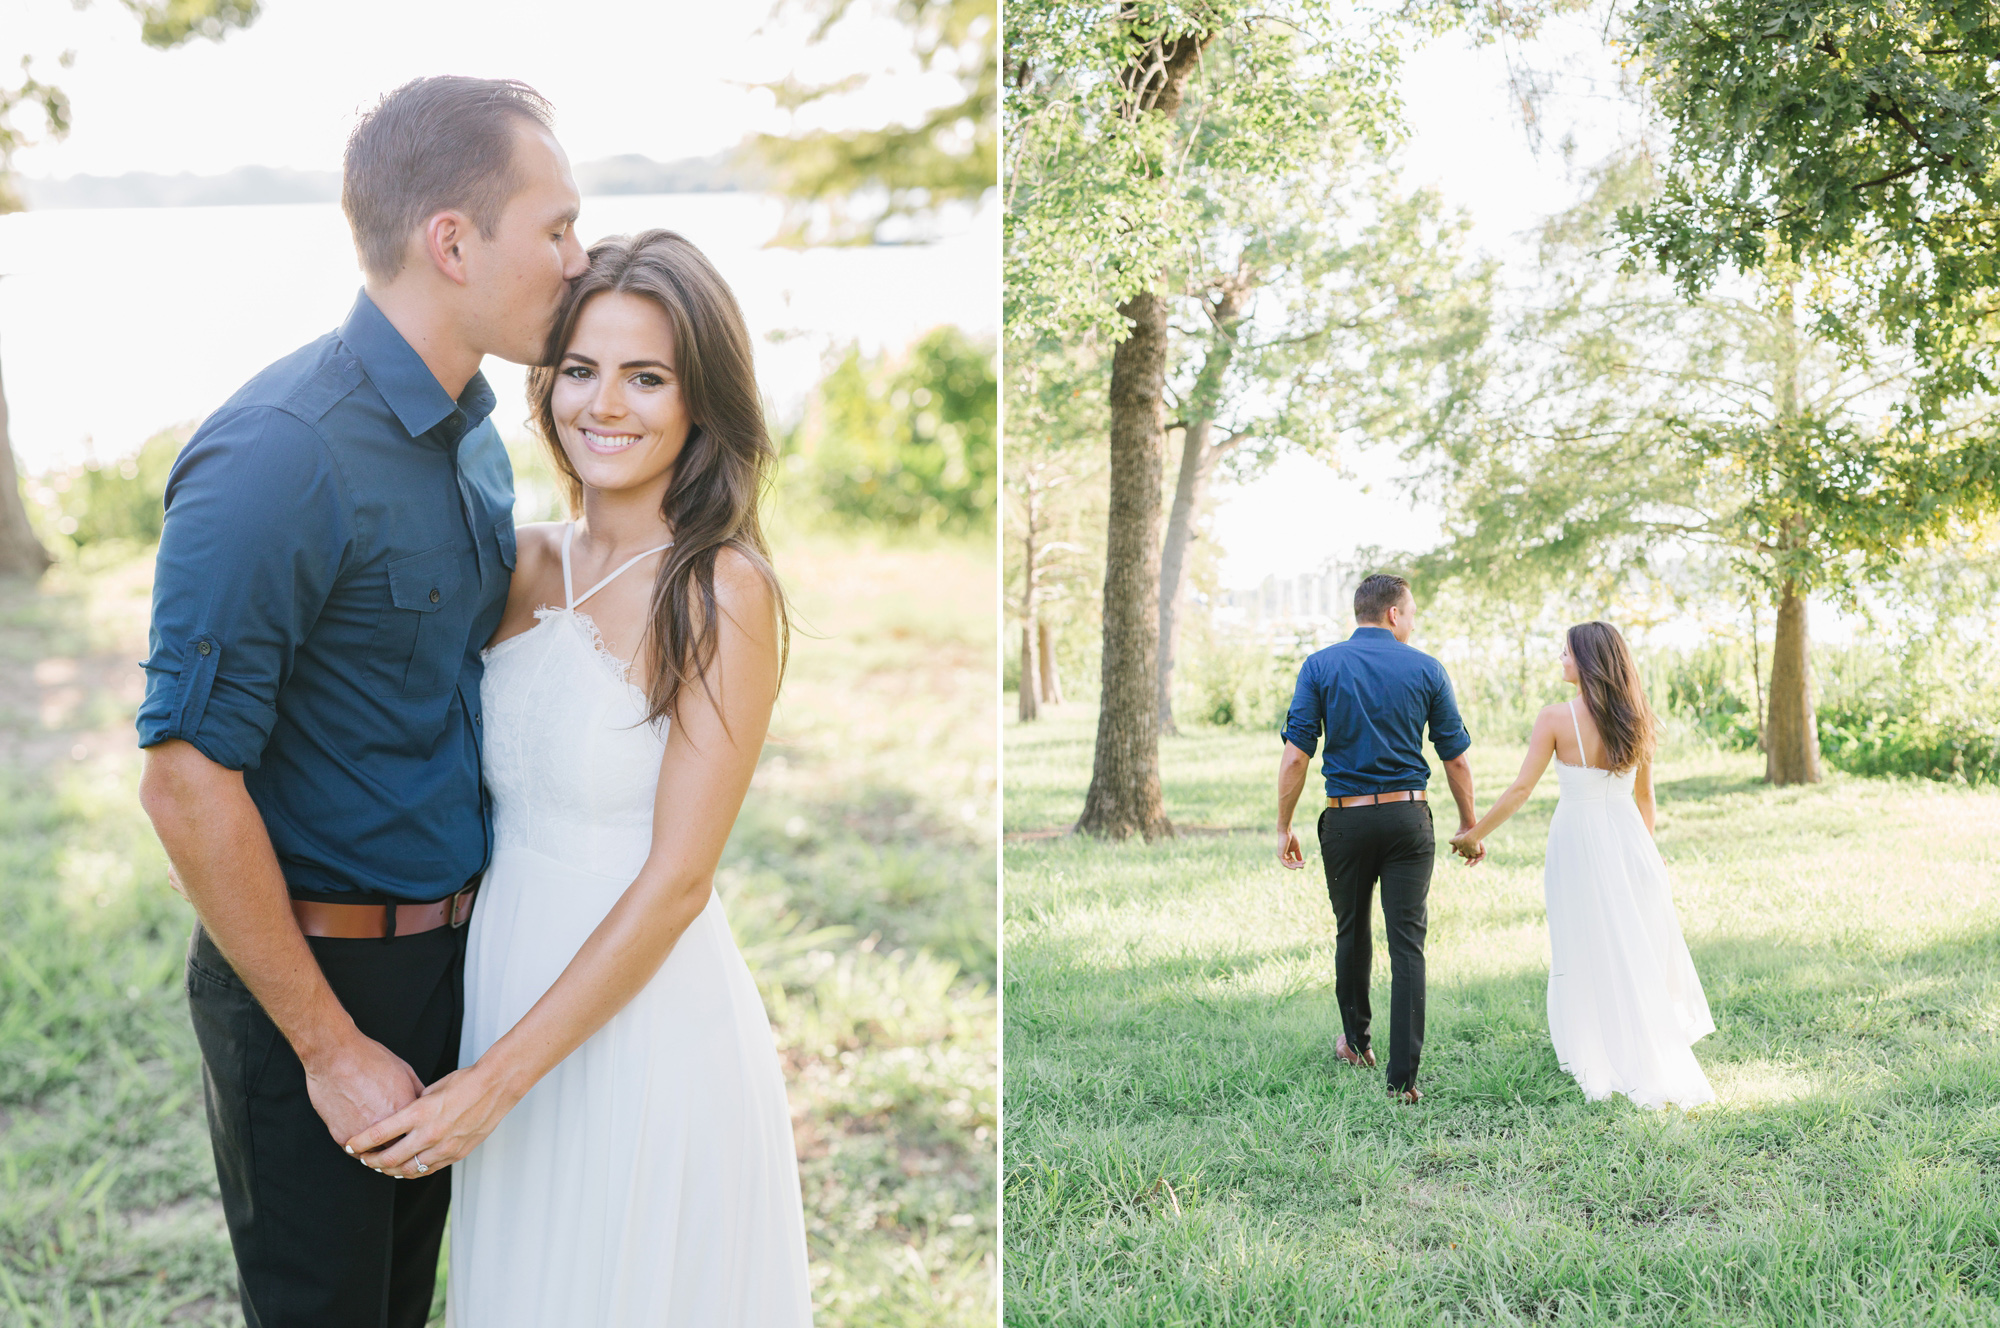 Romantic engagement session at White Rock Lake in Dallas, Texas.